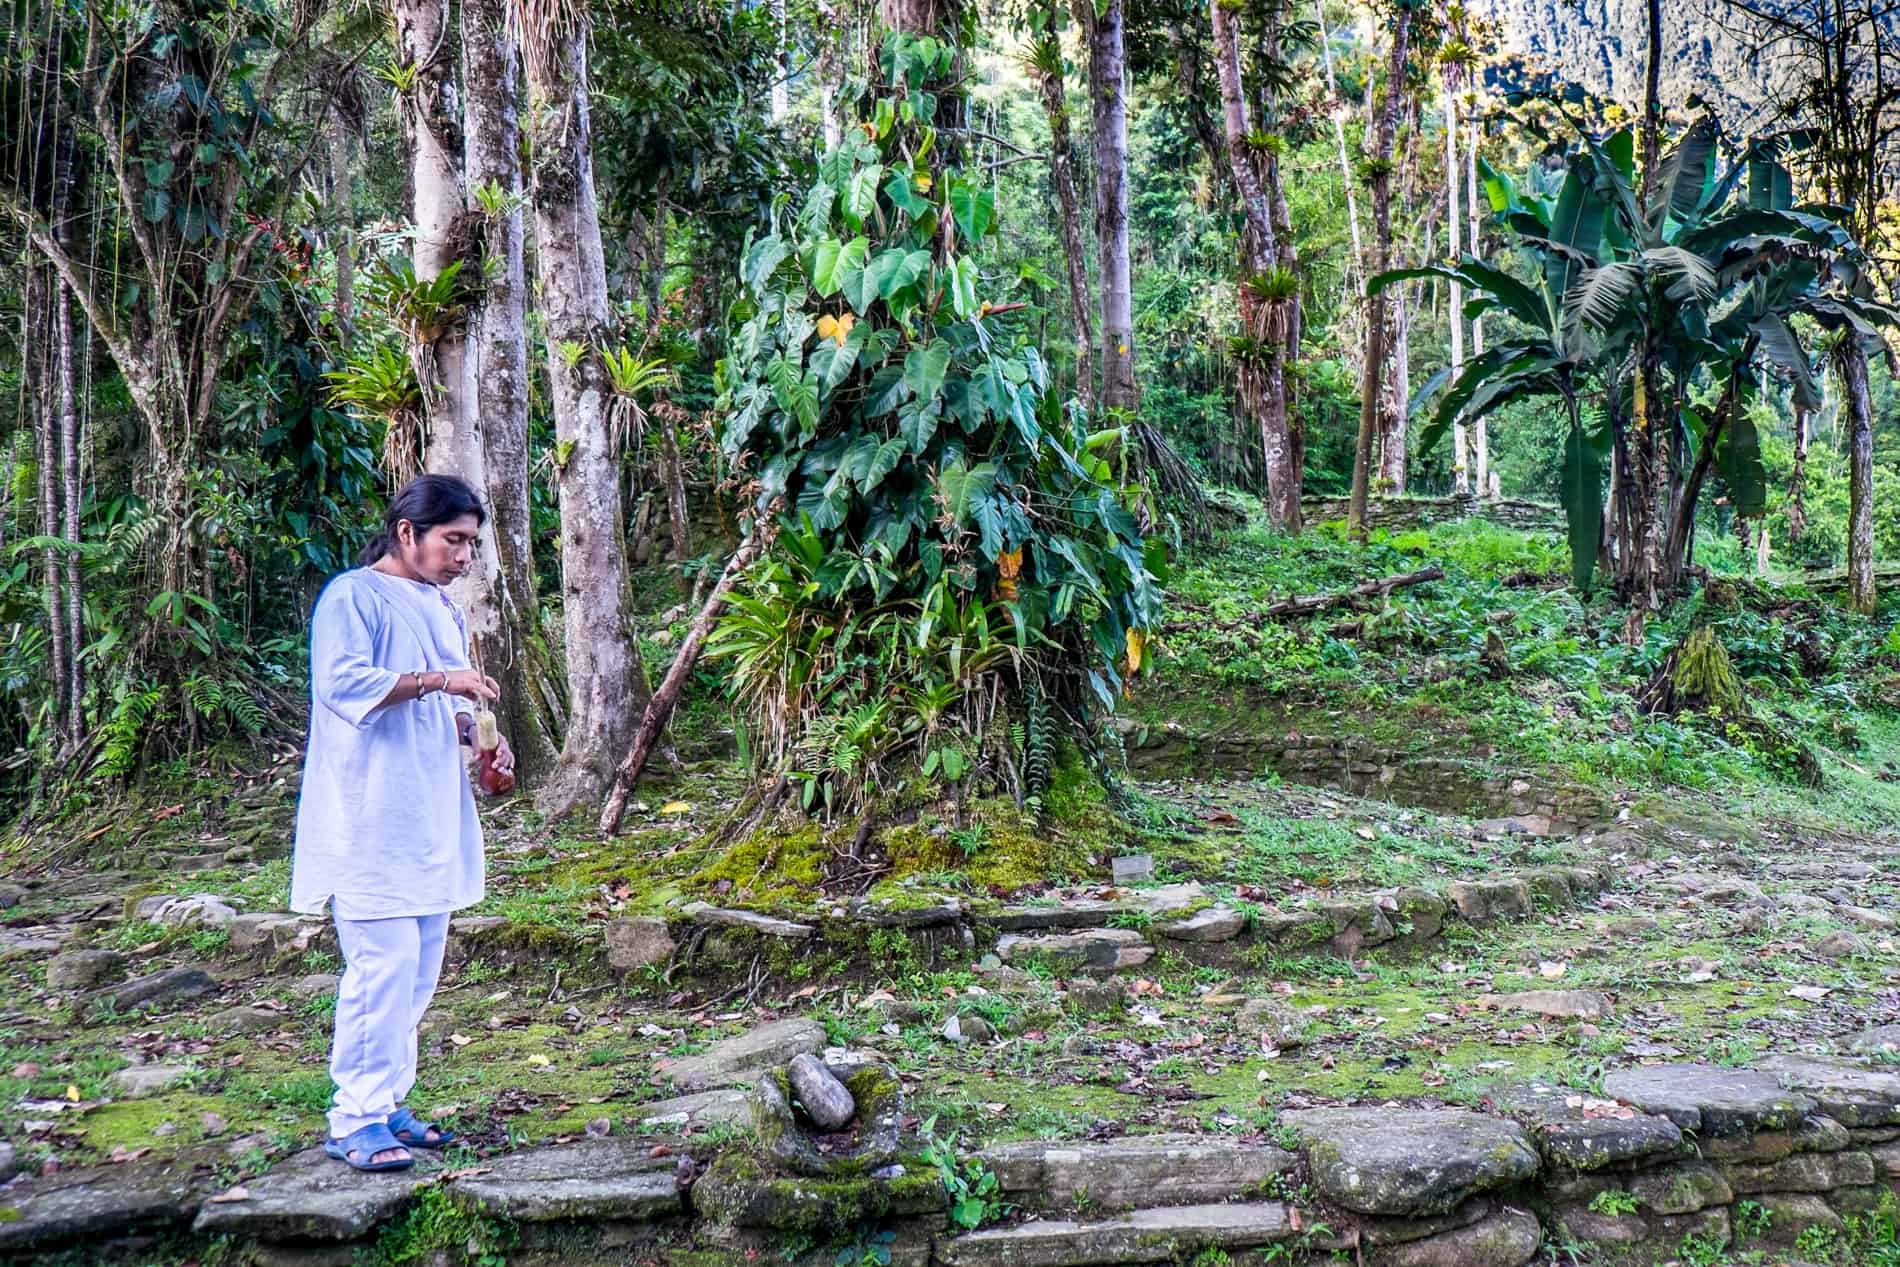 Wiwa man in white dress standing within the jungle stone ruins of The Lost City Ciudad Perdida in Colombia.